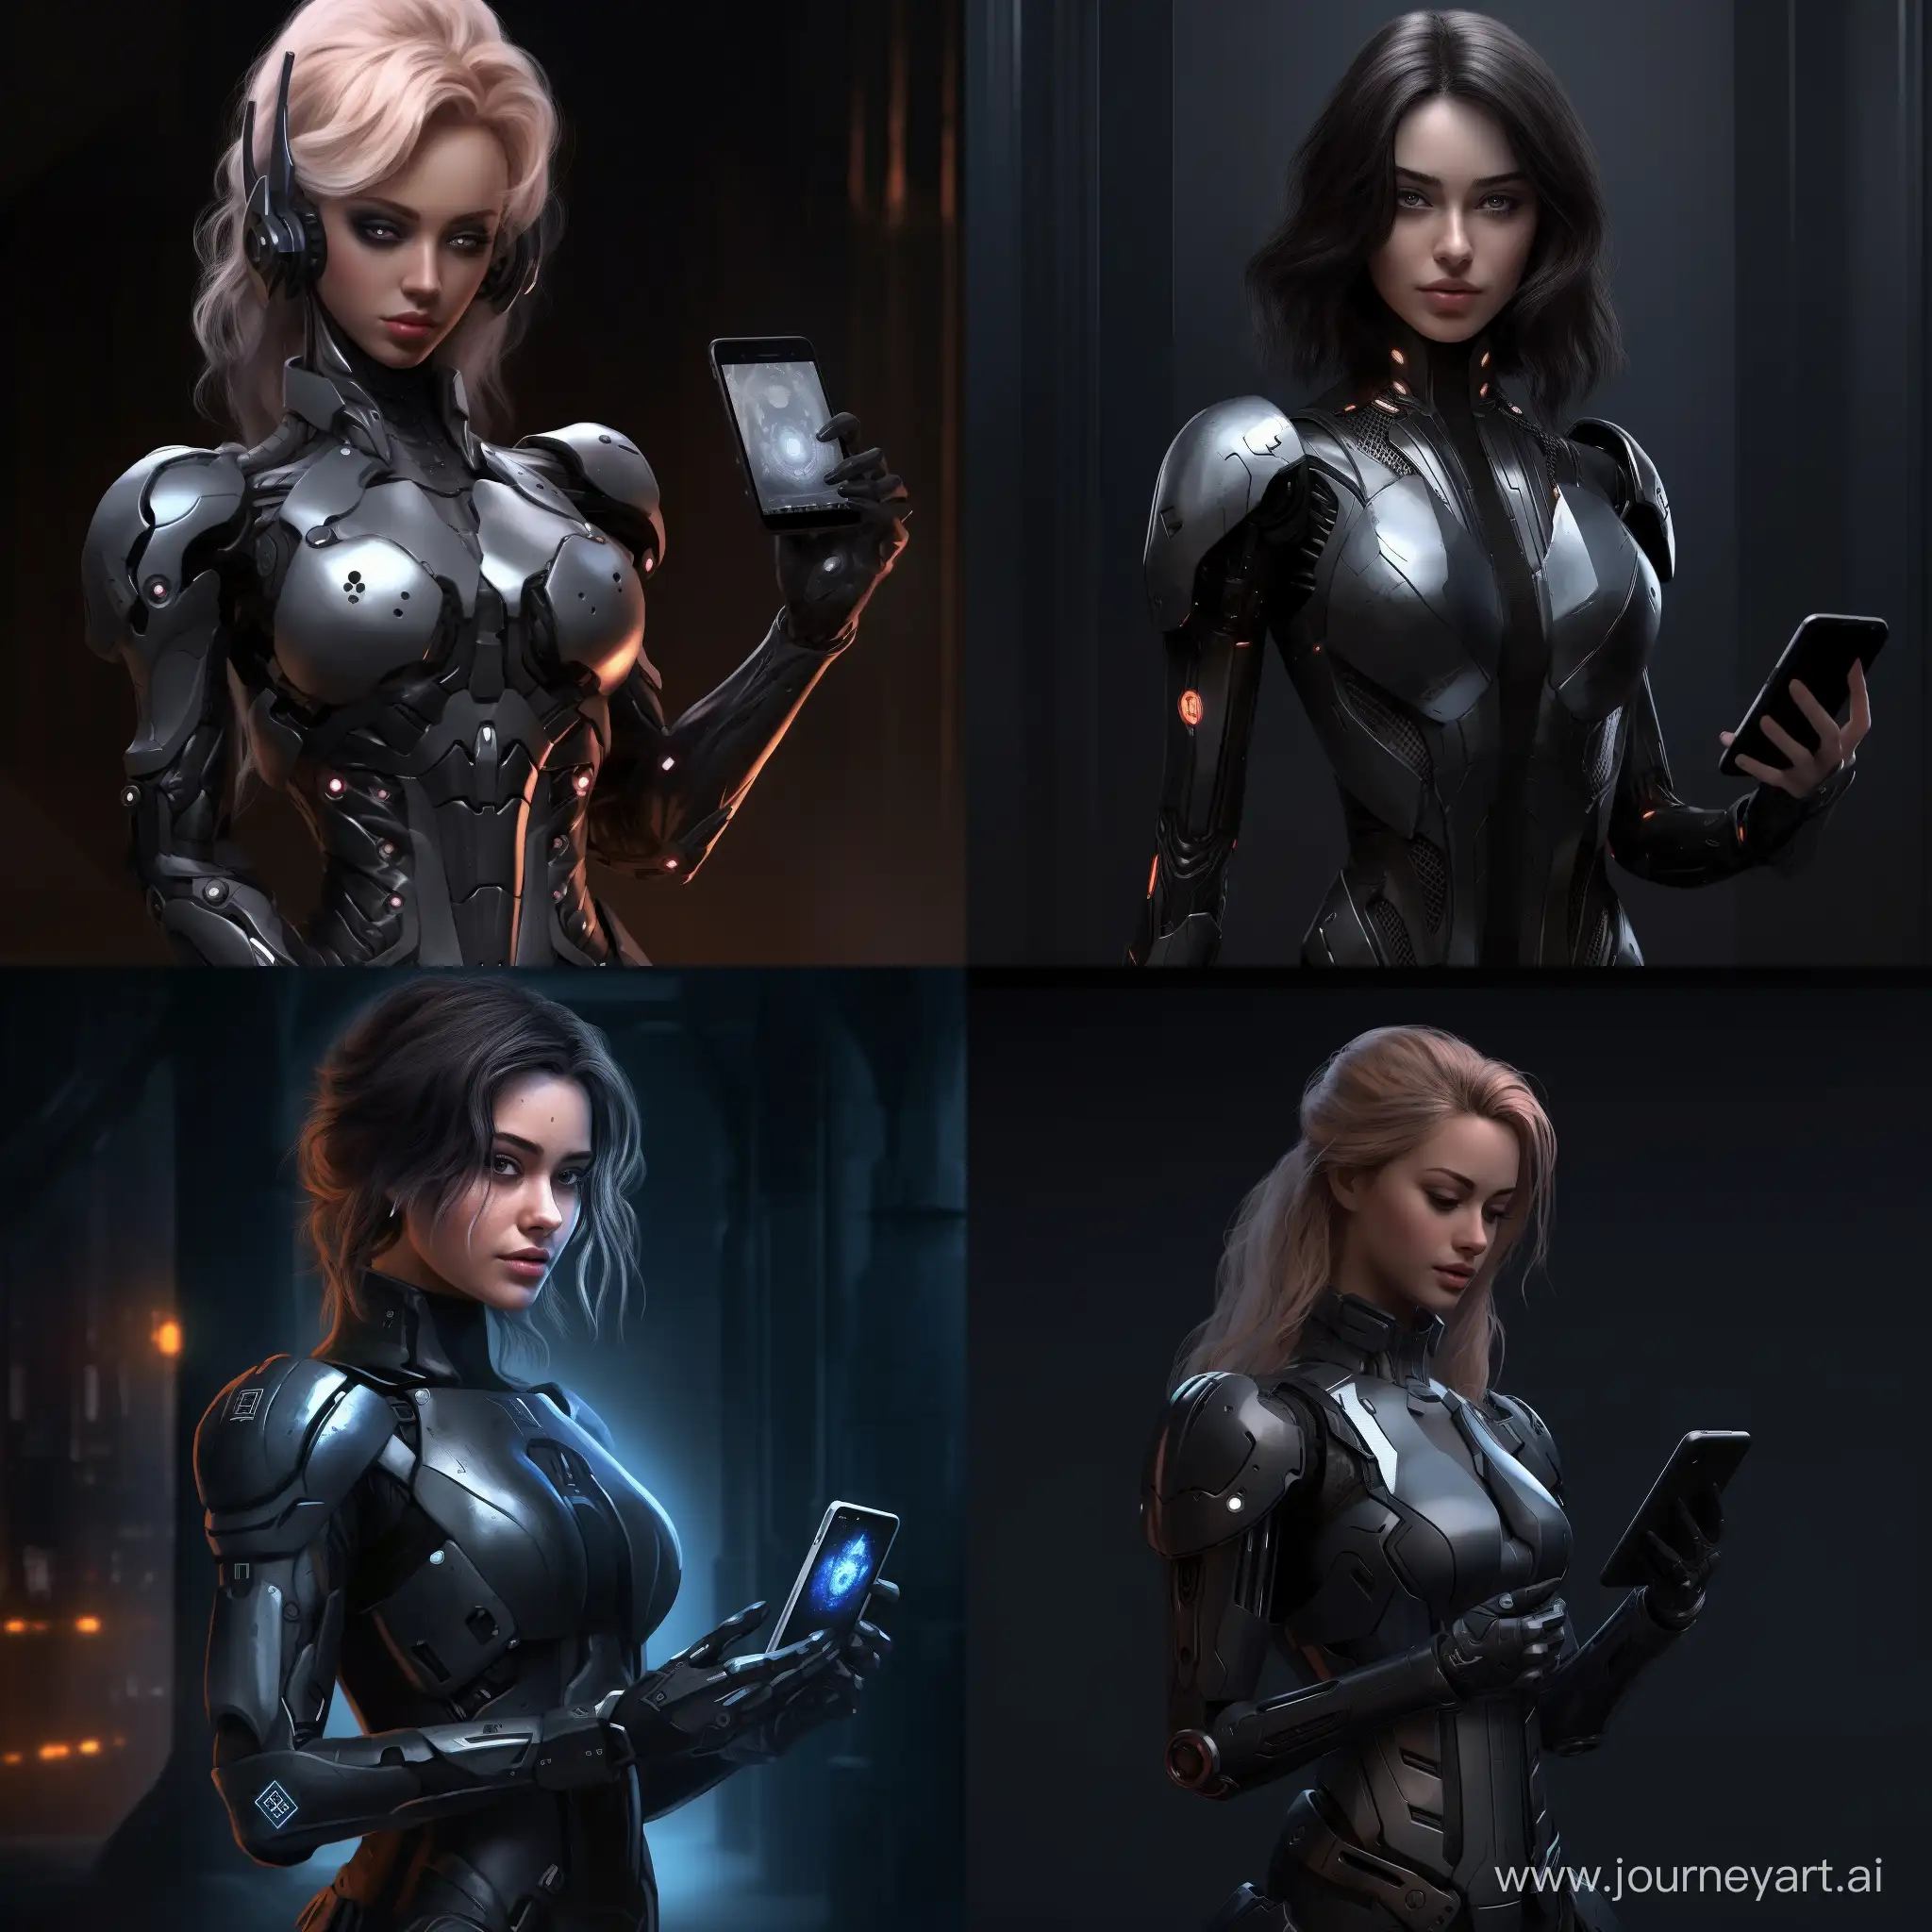 A female robot is cute, made of dark gray metal, standing half sideways and holding a phone in her hand, cyberpunk style, futuristic style, on a dark background